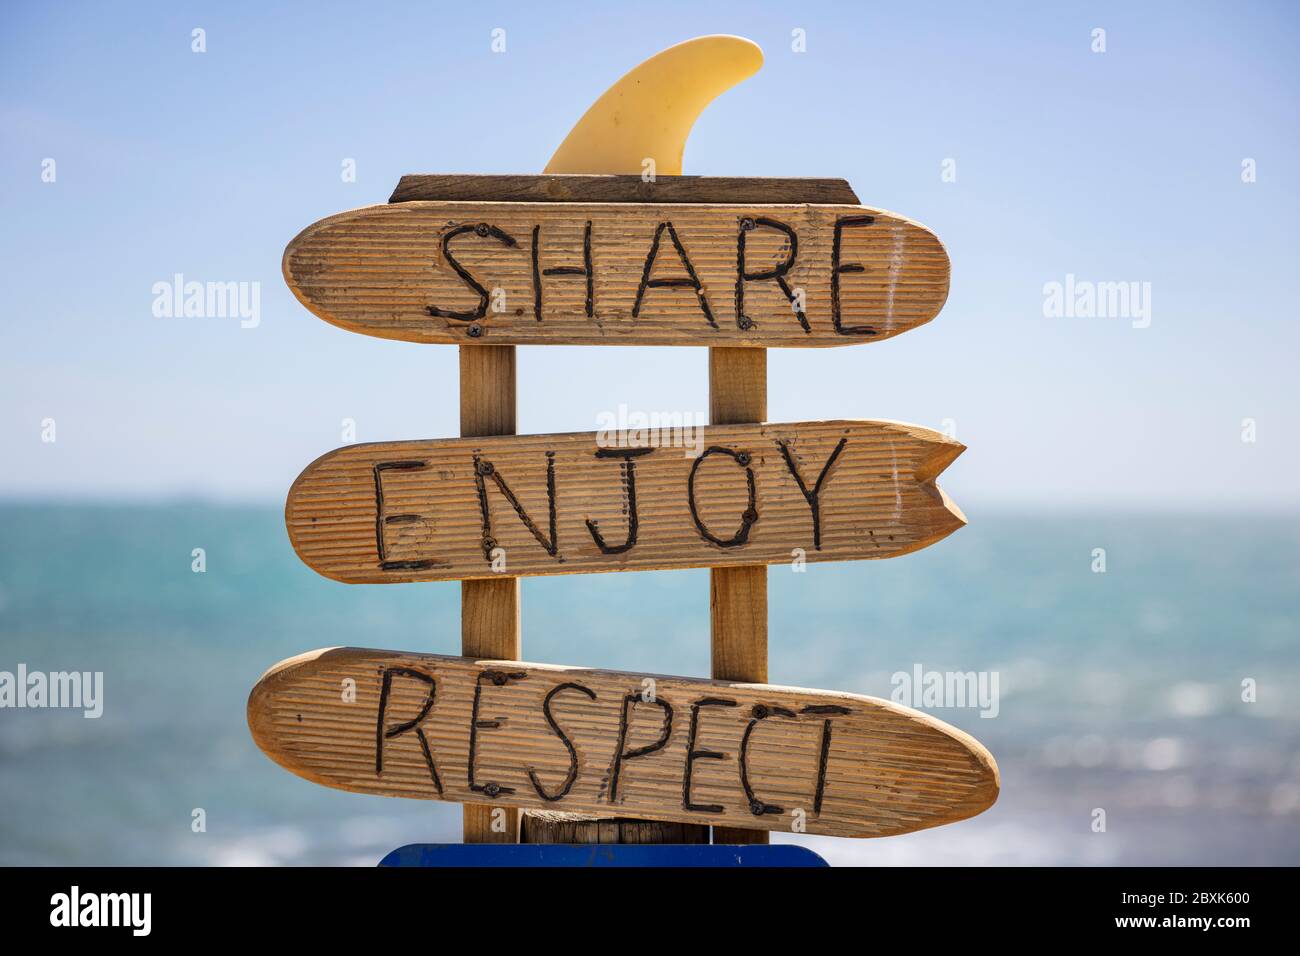 Freemantle Australia November 5th 2019: Share, Enjoy, Respect sign at the entrance to Cottesloe Beach in Perth, Western Australia Stock Photo